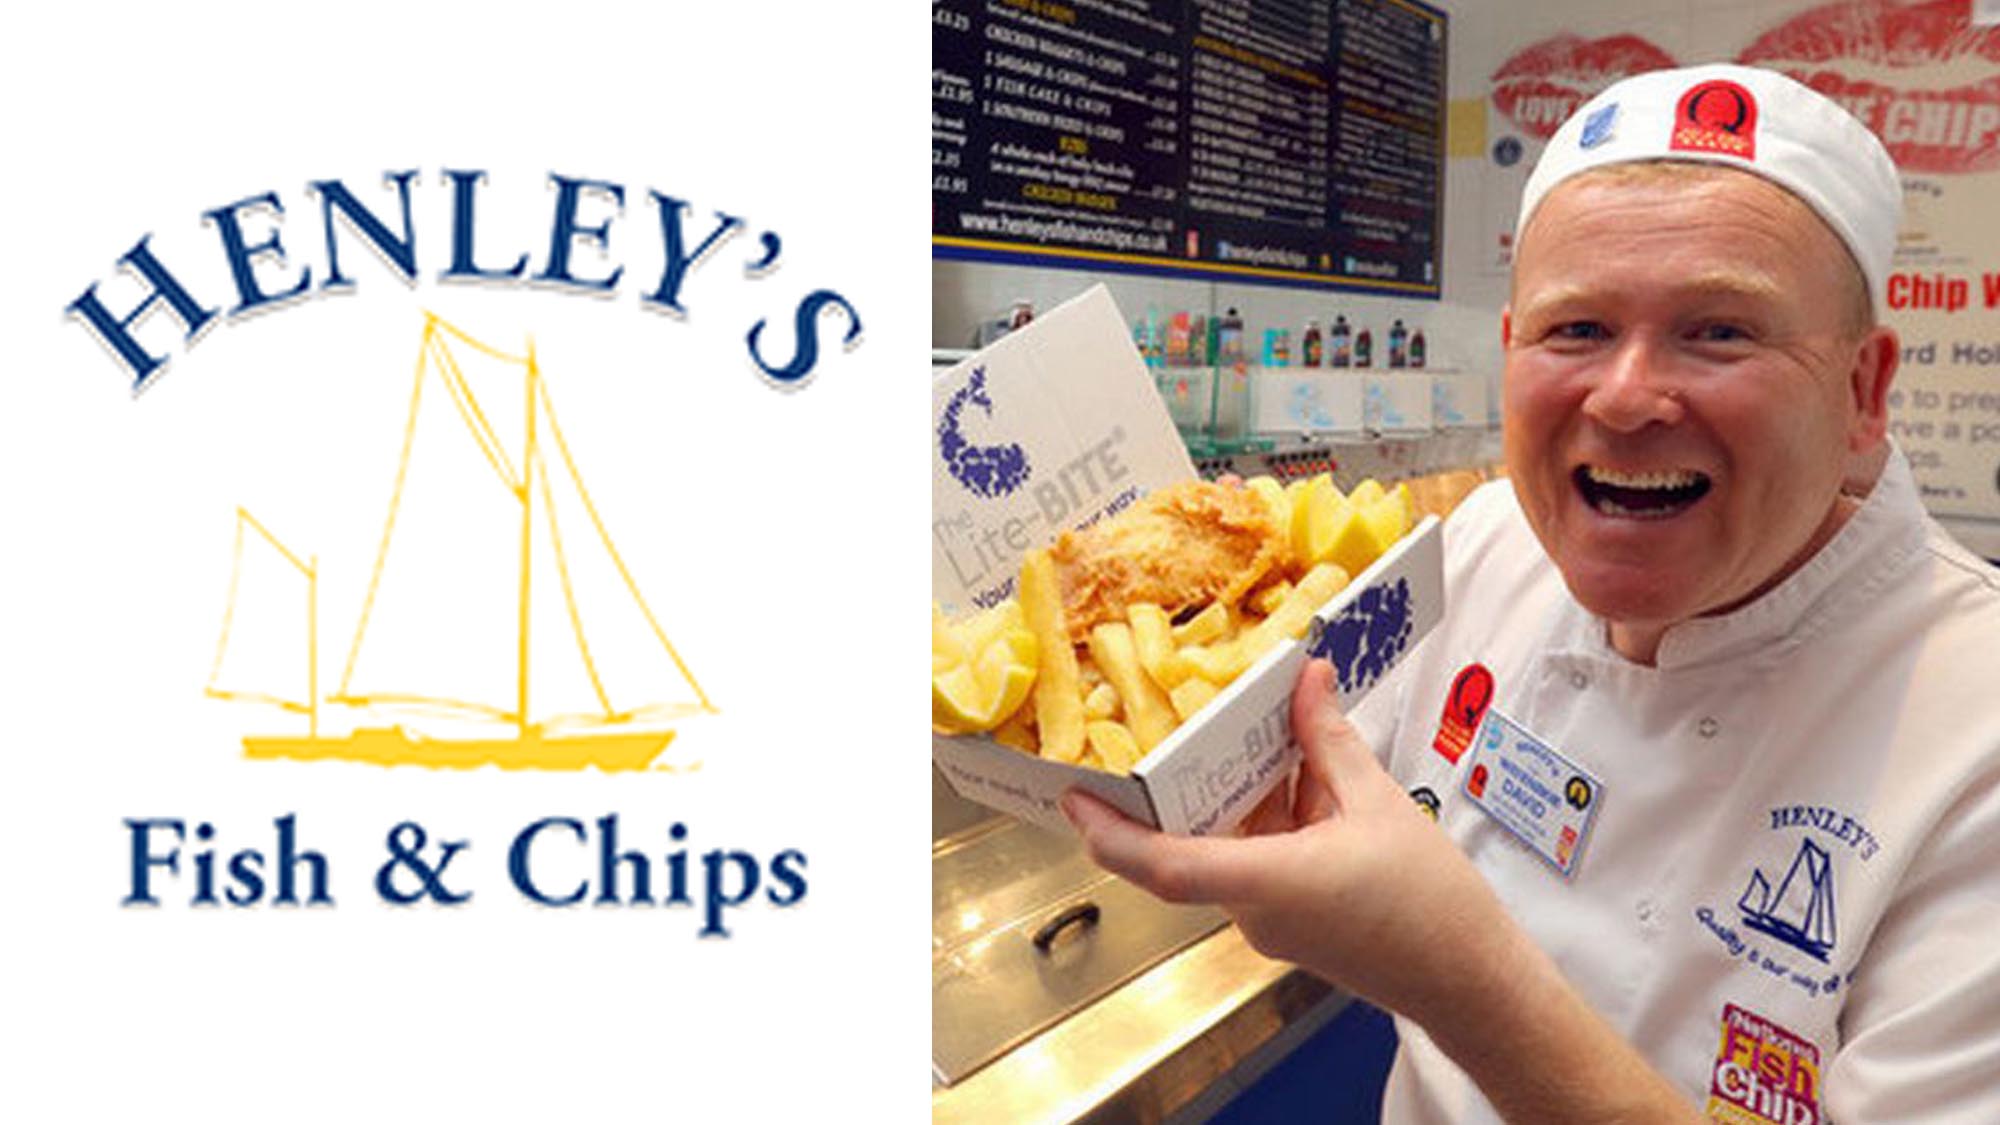 Henley’s Fish & Chips